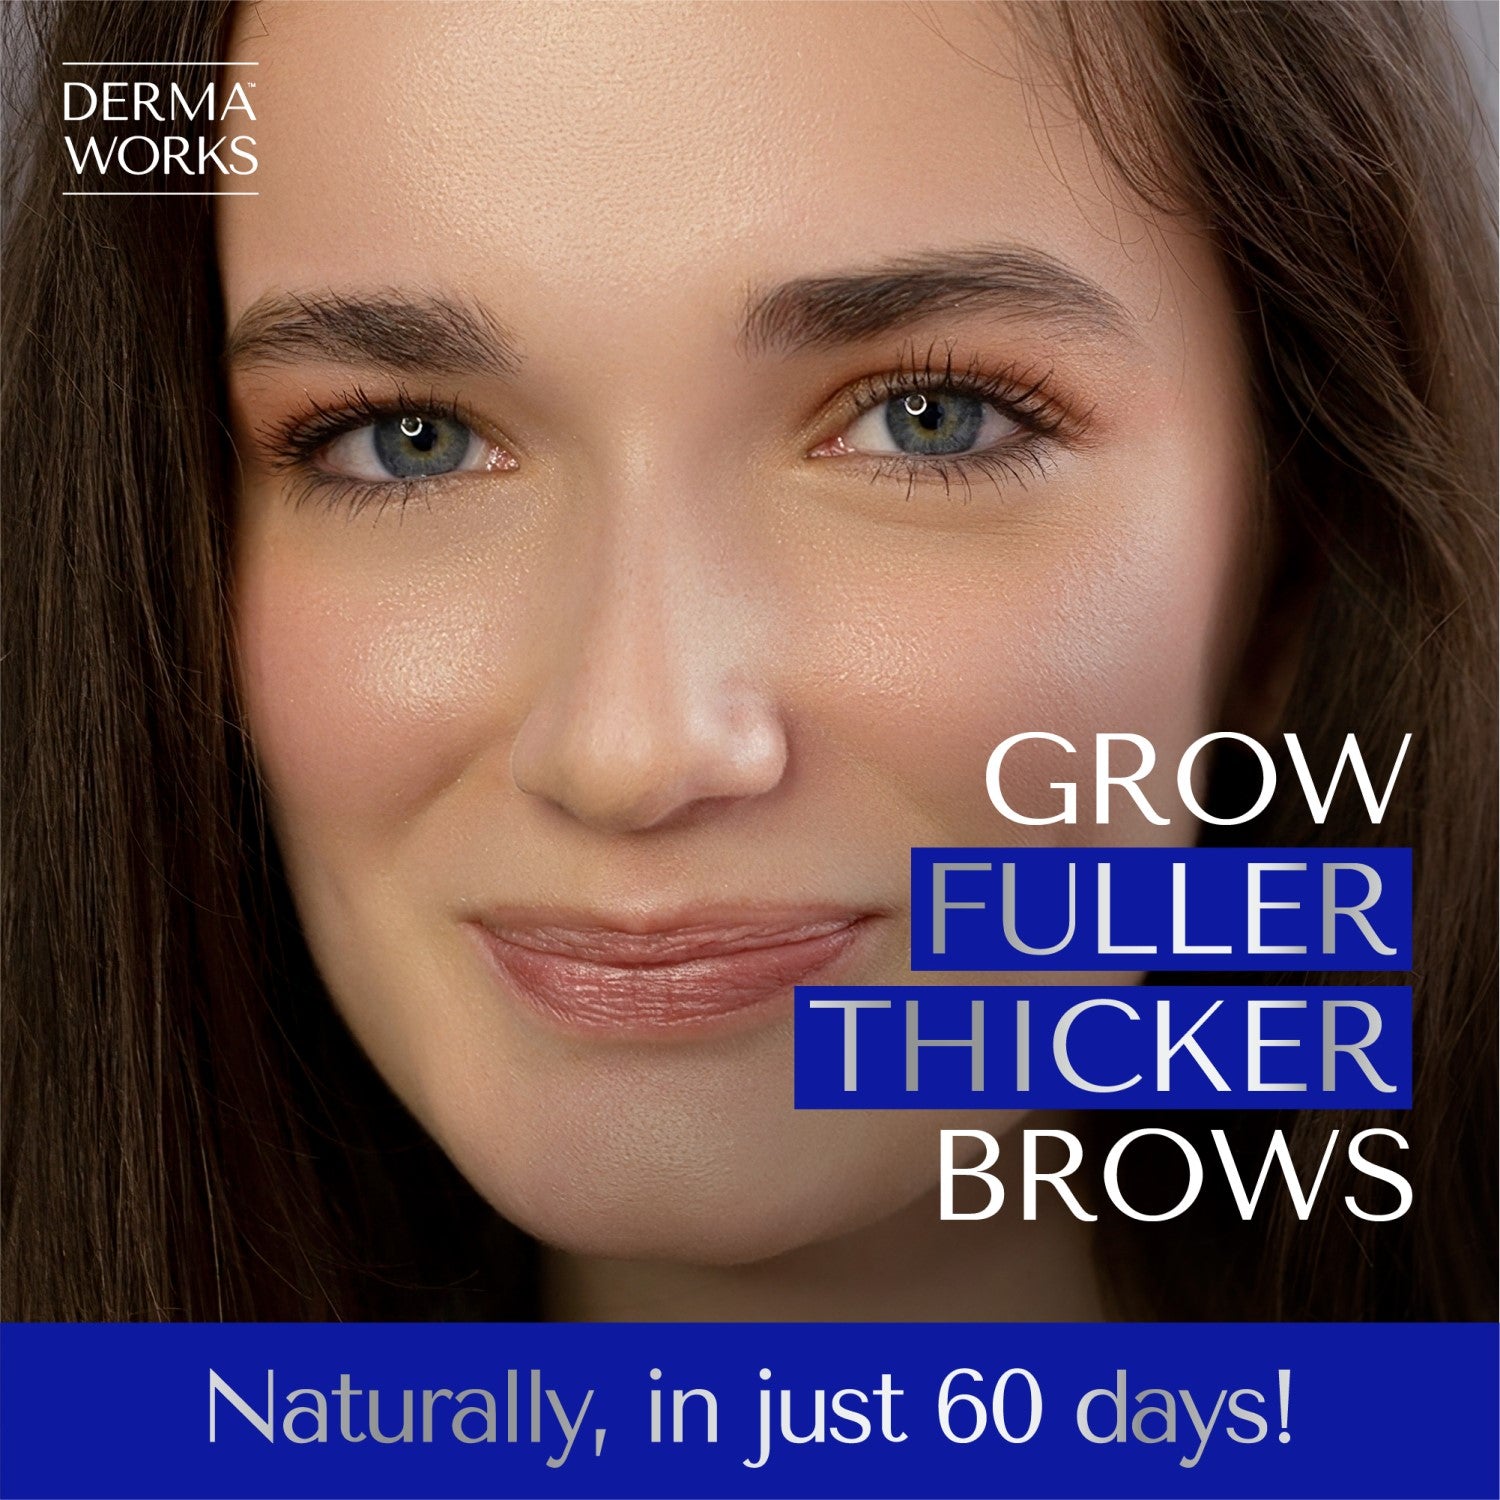 Dermaworks rapid brow enhancing serum. Grow fuller, thicker and more shapely brows, naturally, in just 60 days.